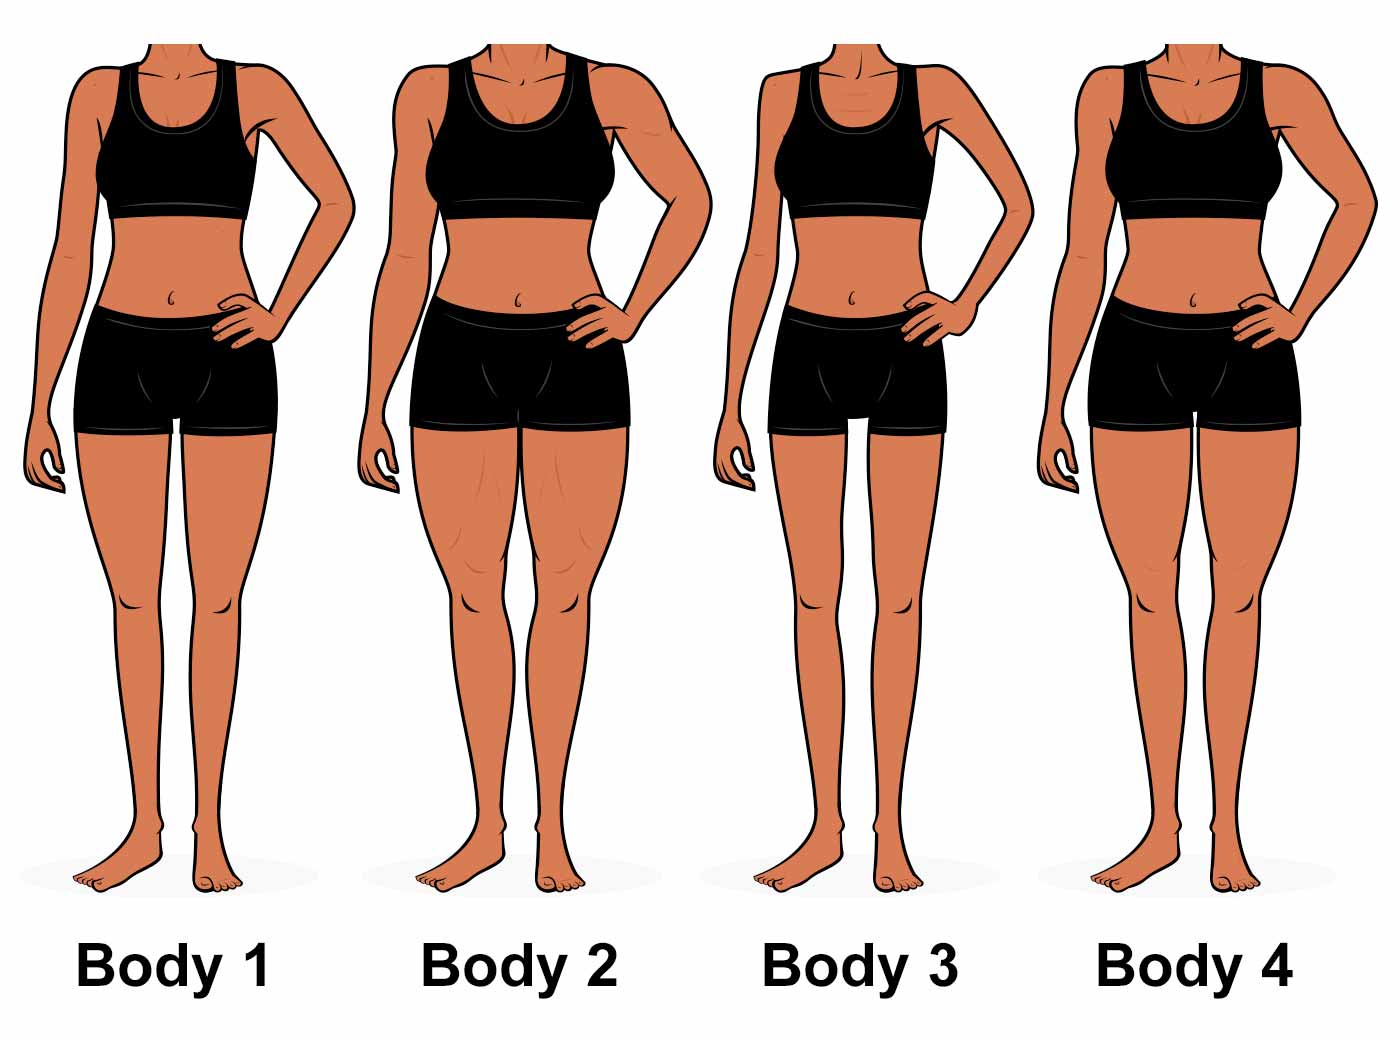 Survey illustration showing varying degrees of female muscularity.